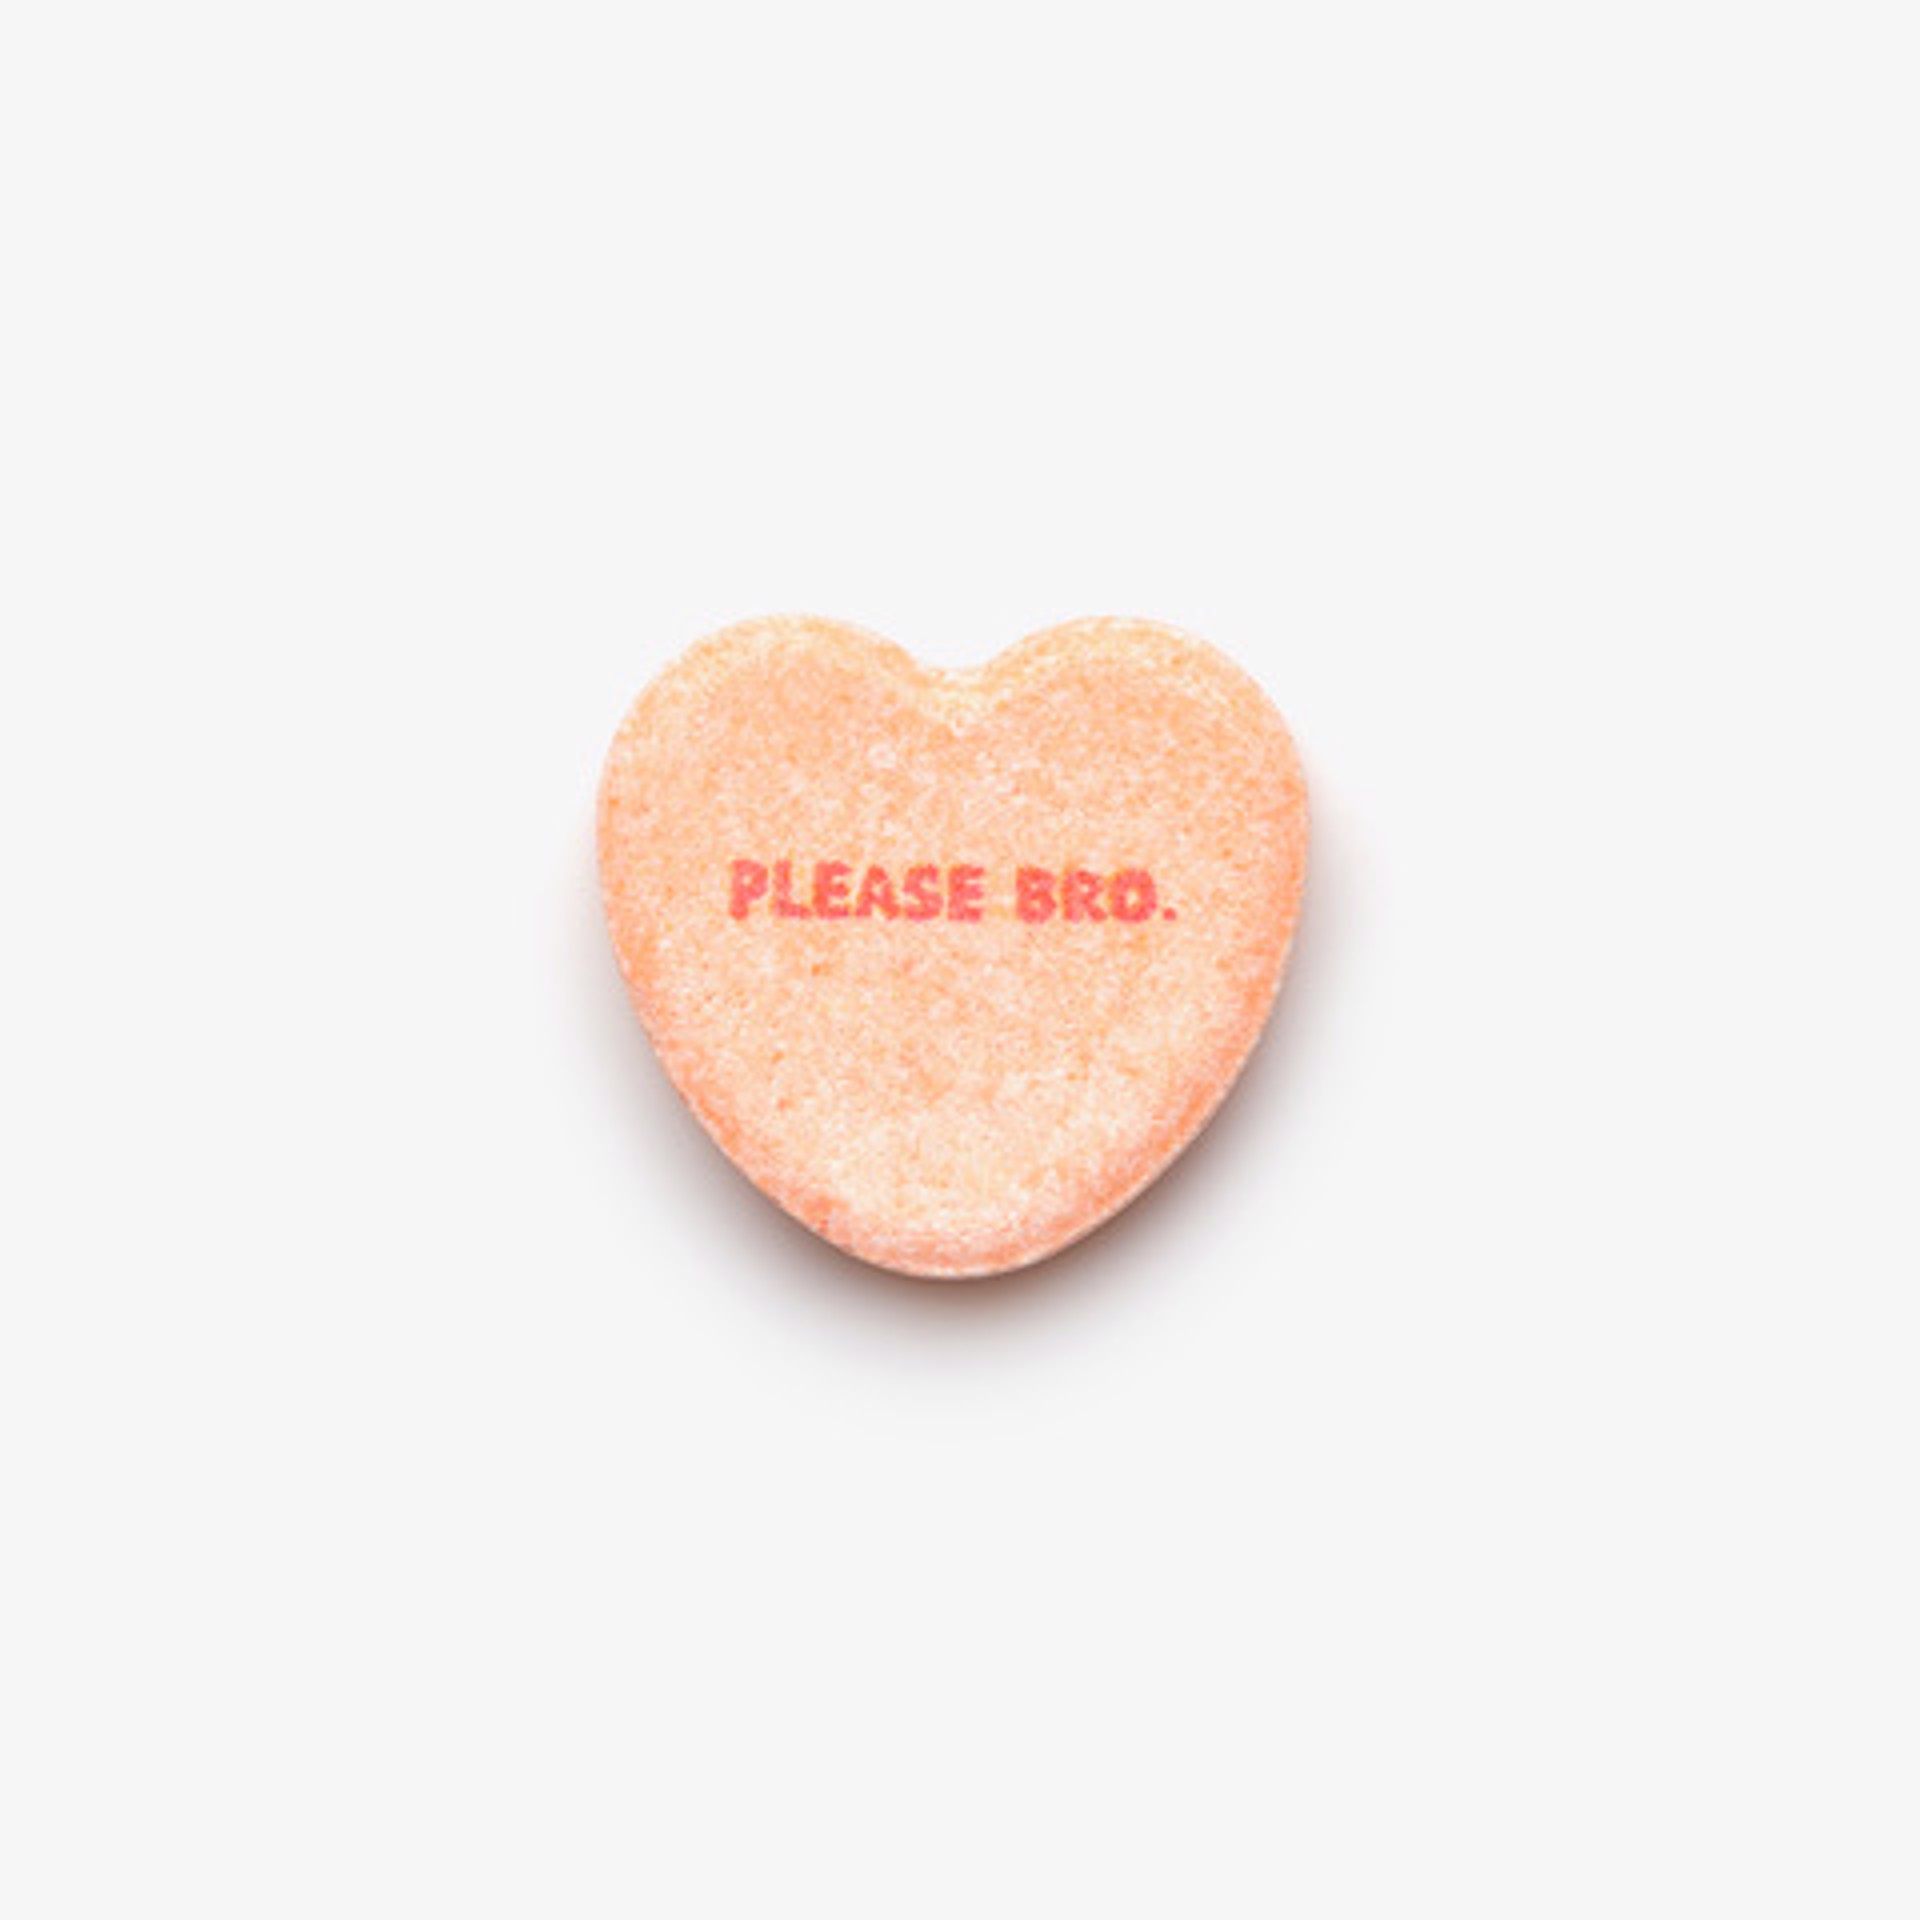 Please Bro by Peter Andrew Lusztyk / Refined Sugar